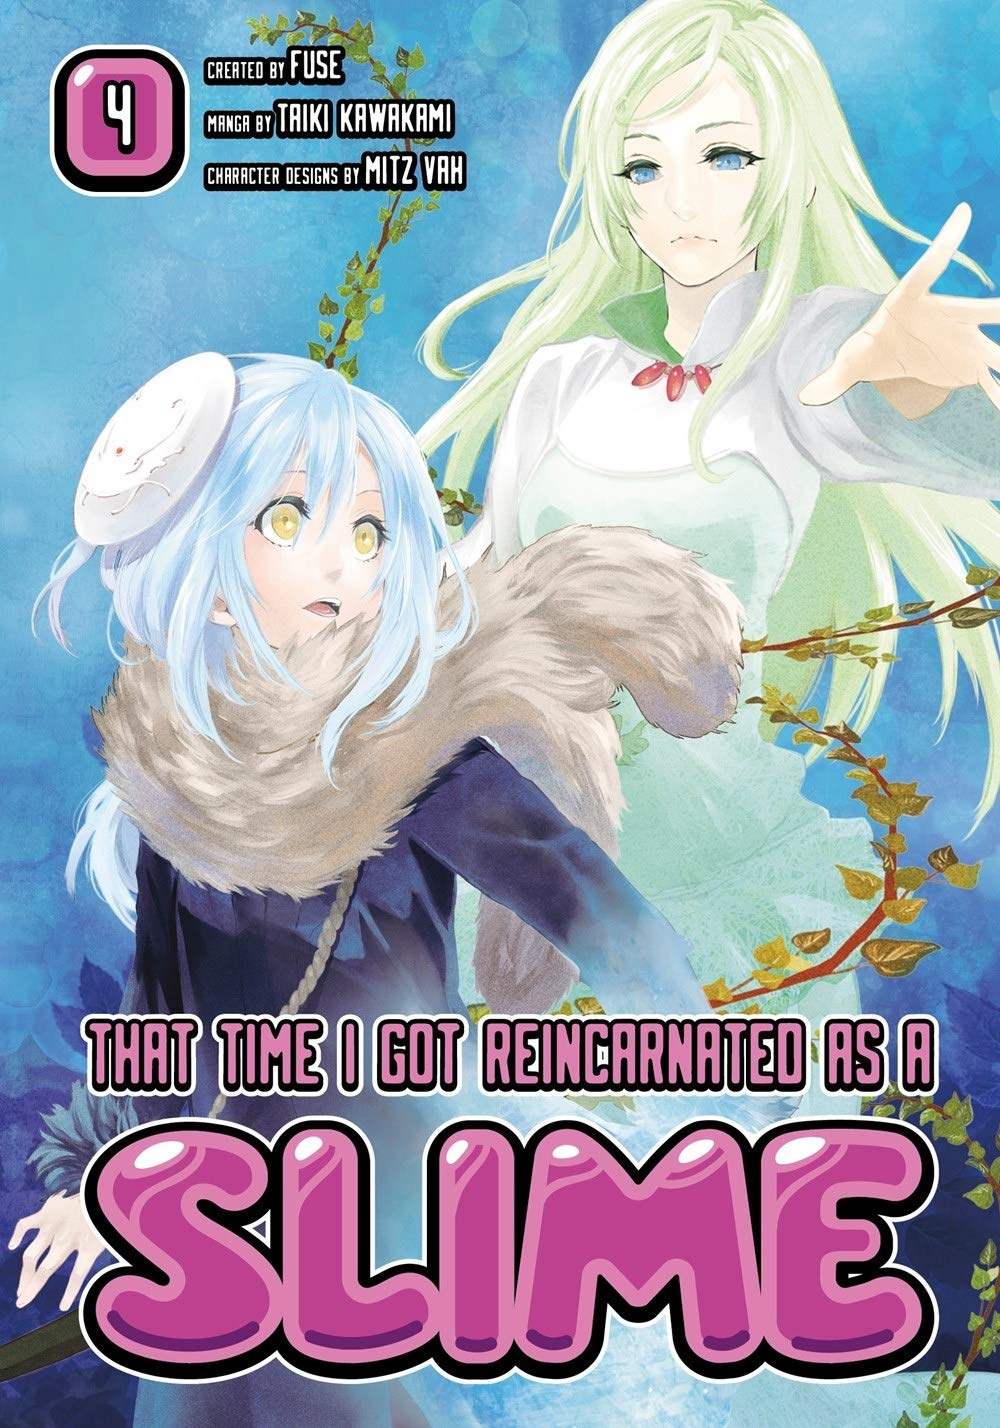 That Time I Got Reincarnated as a Slime - Volume 4 | Fuse